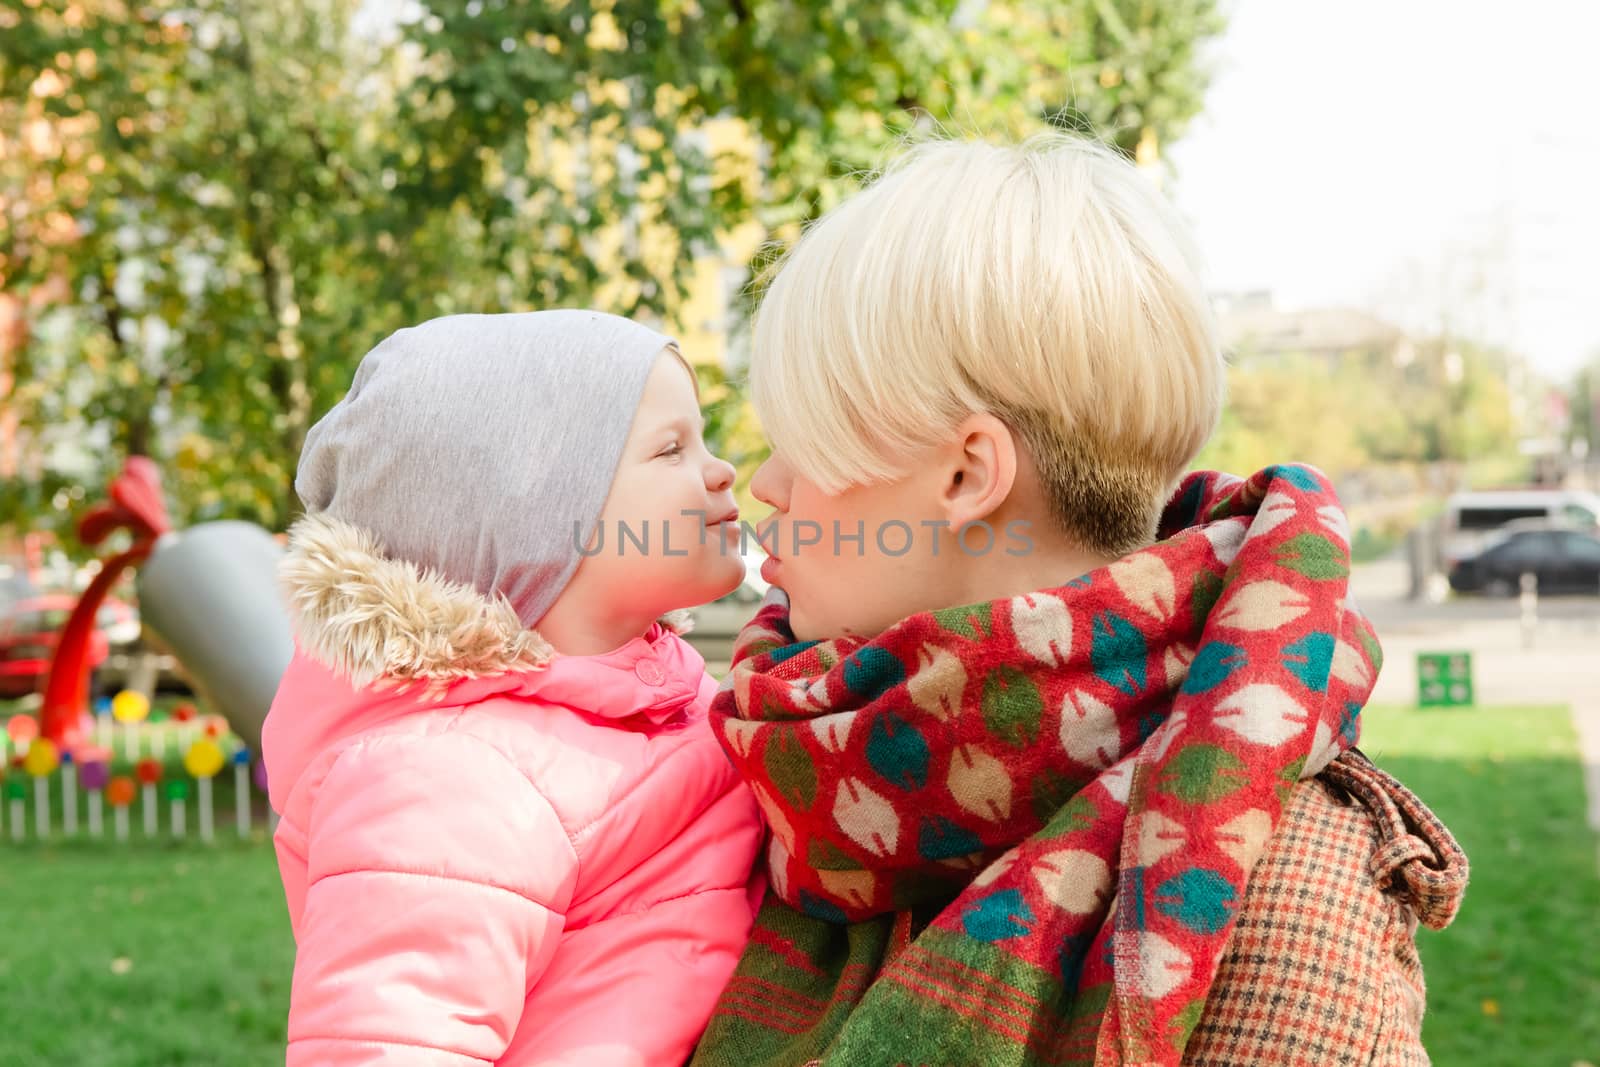 Beautiful Mother And Baby outdoors. Nature. Beauty Mum and her Child playing in Park together. Outdoor Portrait of happy family. Joy. Mom and Baby